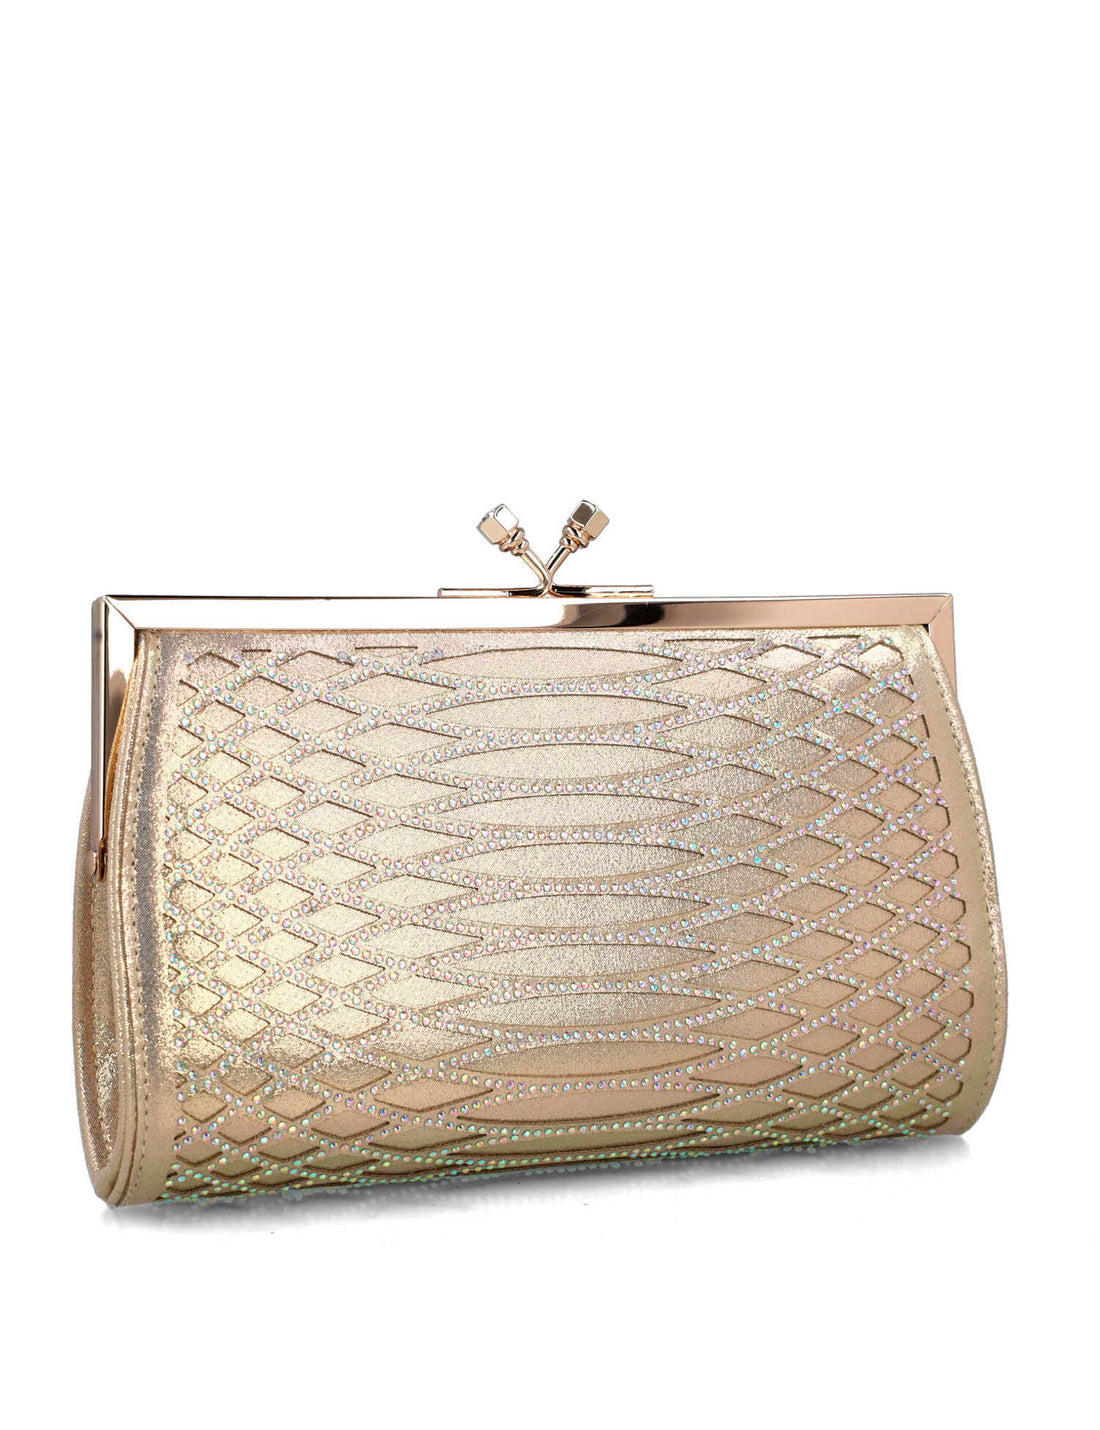 Gold Clutch In Imitation Snake Leather_85597_00_02